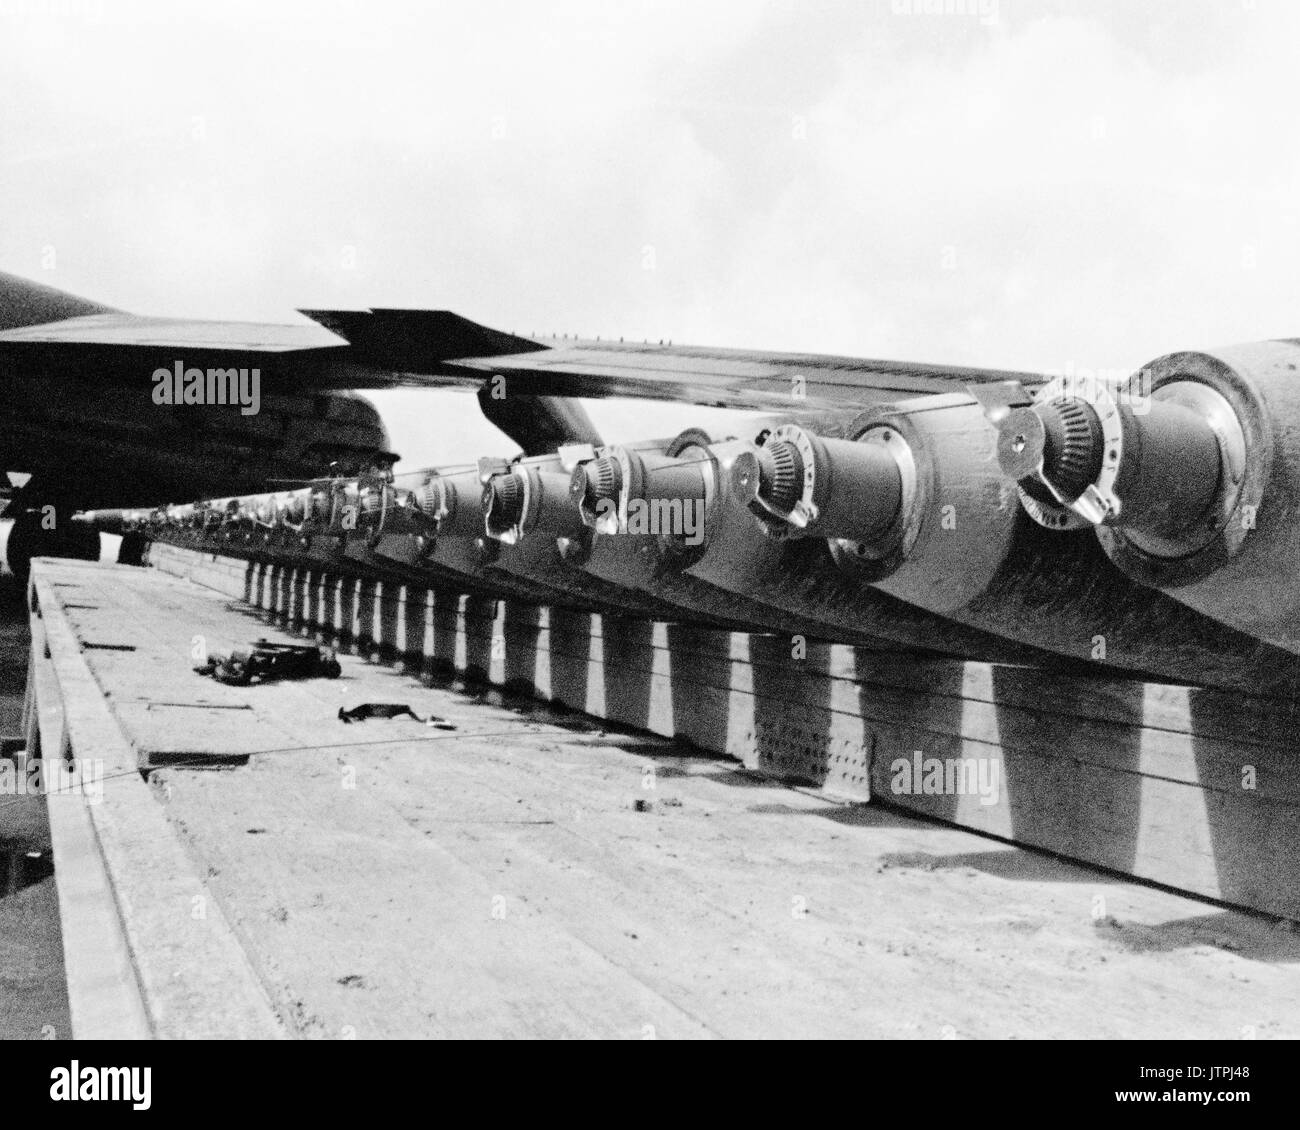 Bombs lined up as preparations are made for LINEBACKER Operations over North Vietnam. Stock Photo